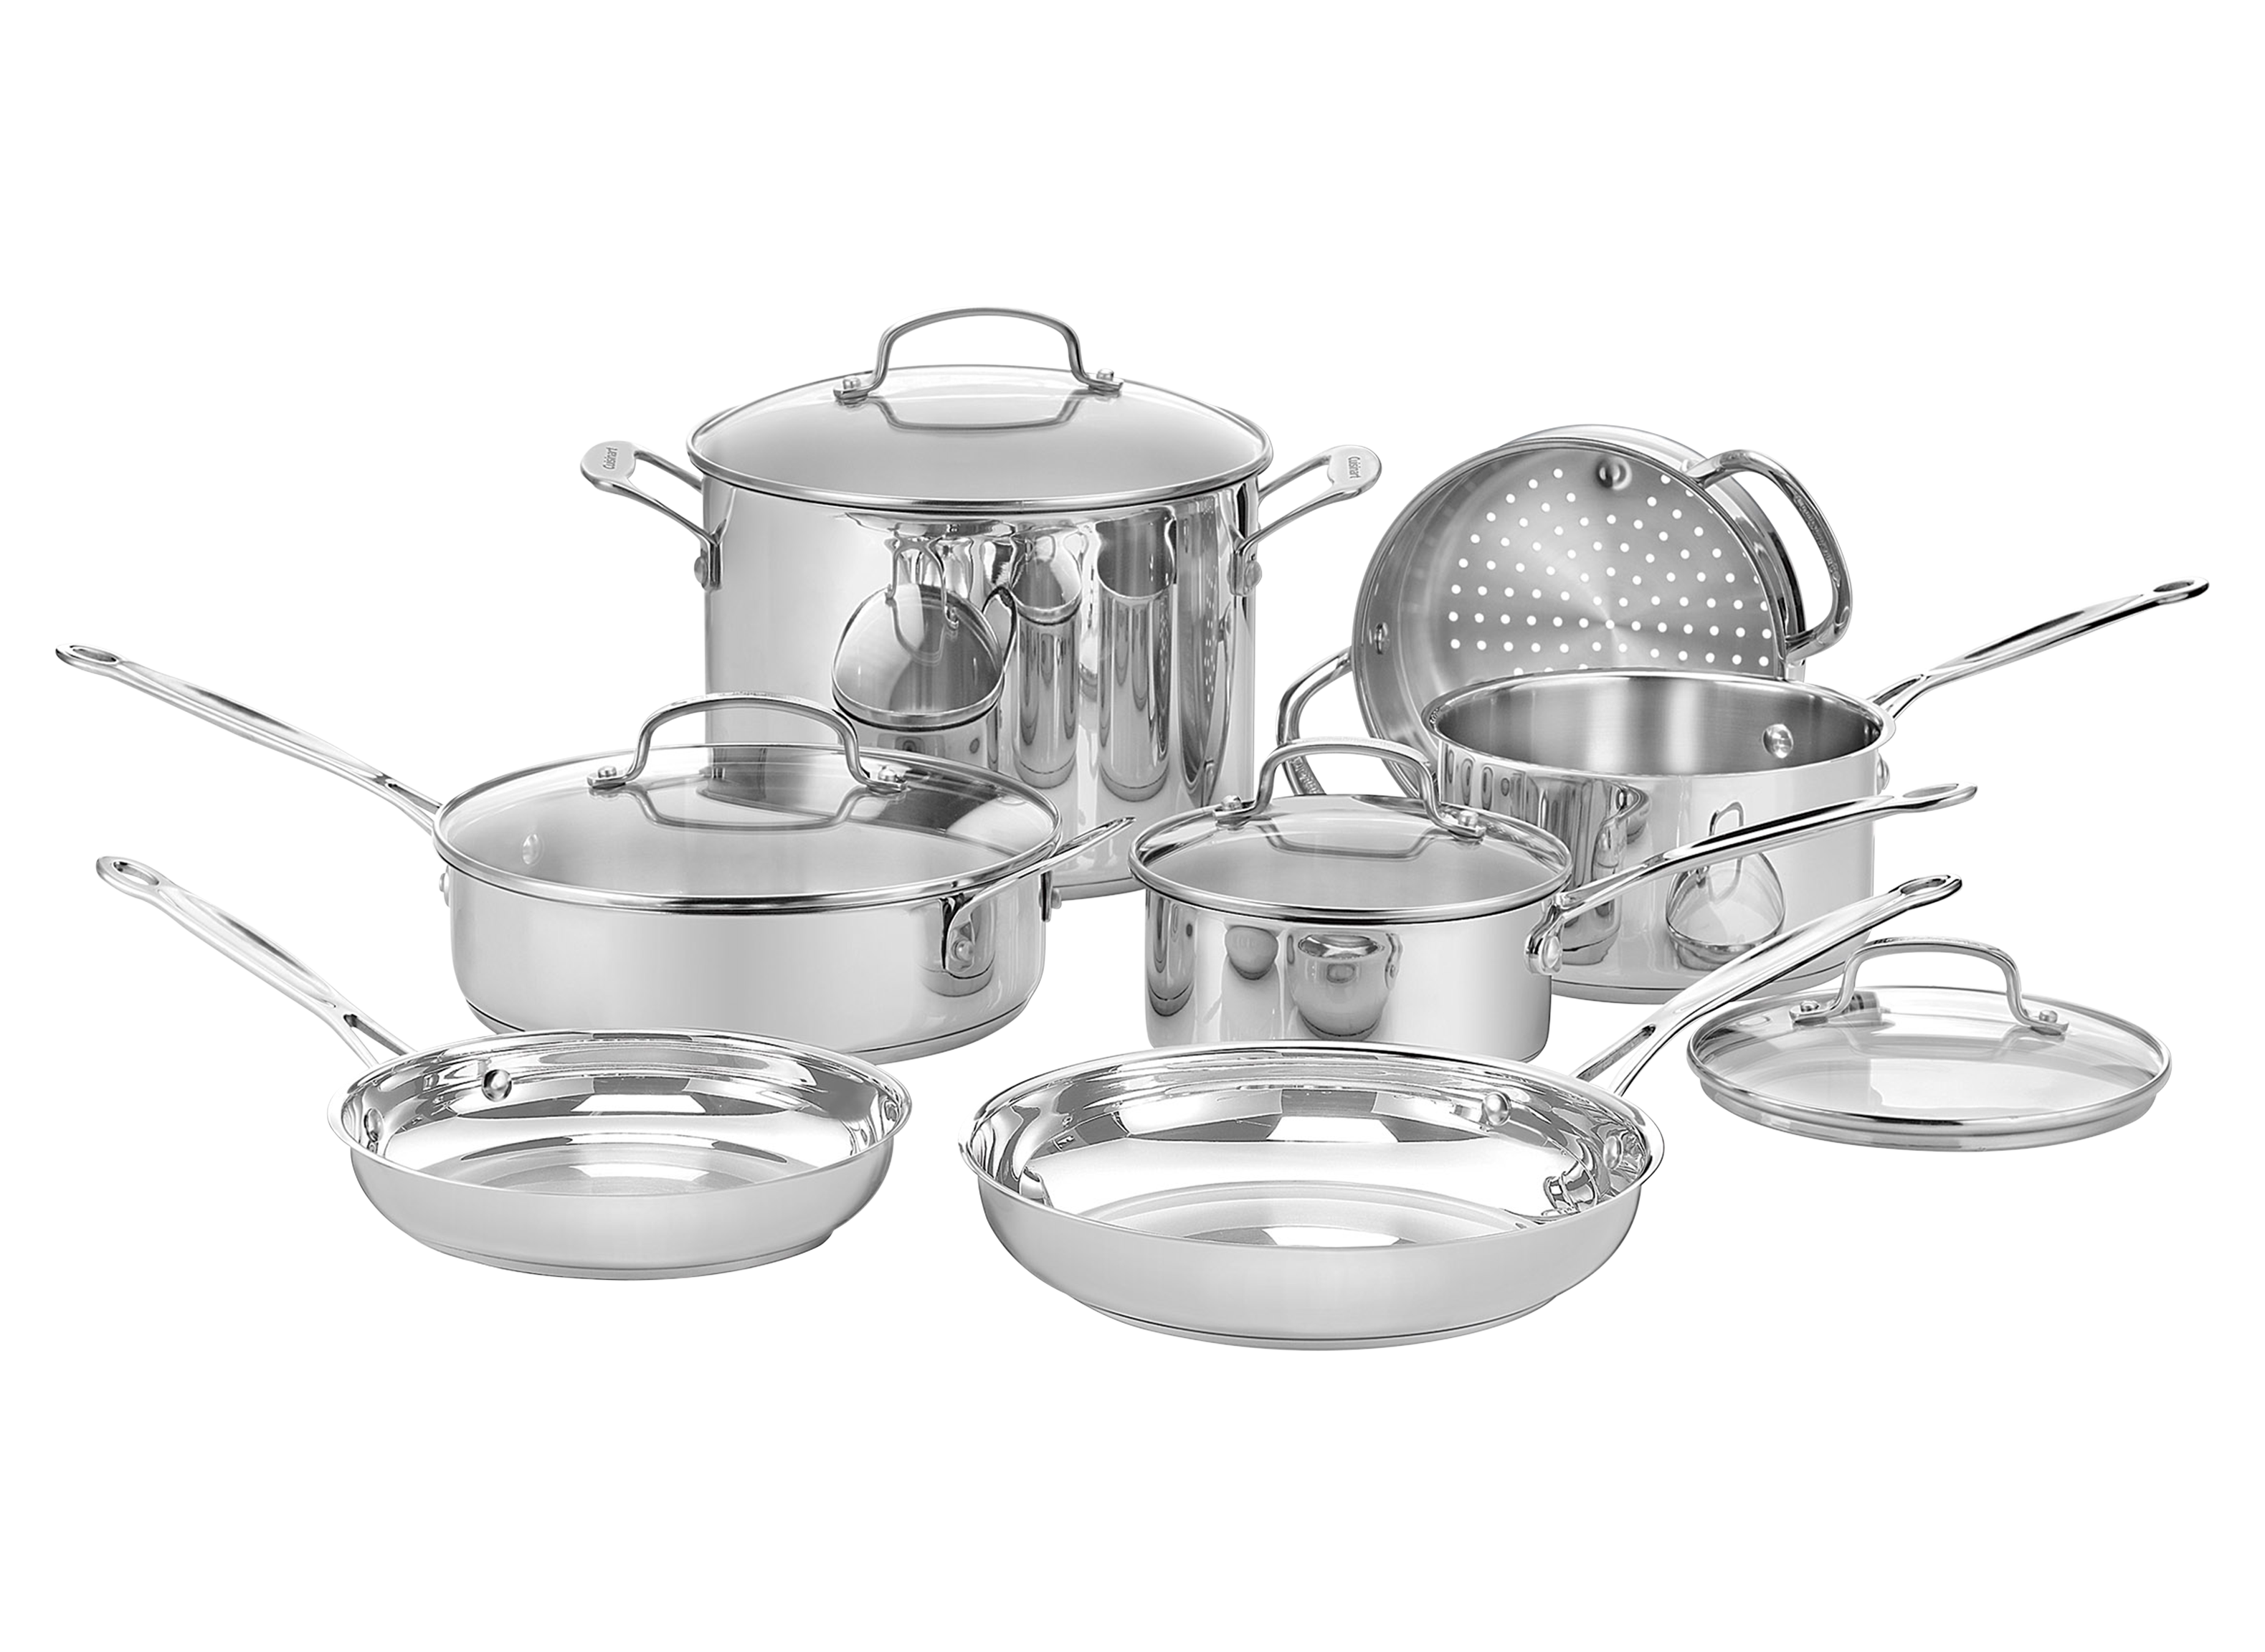 In-Depth Product Review: Cuisinart Professional Series Stainless